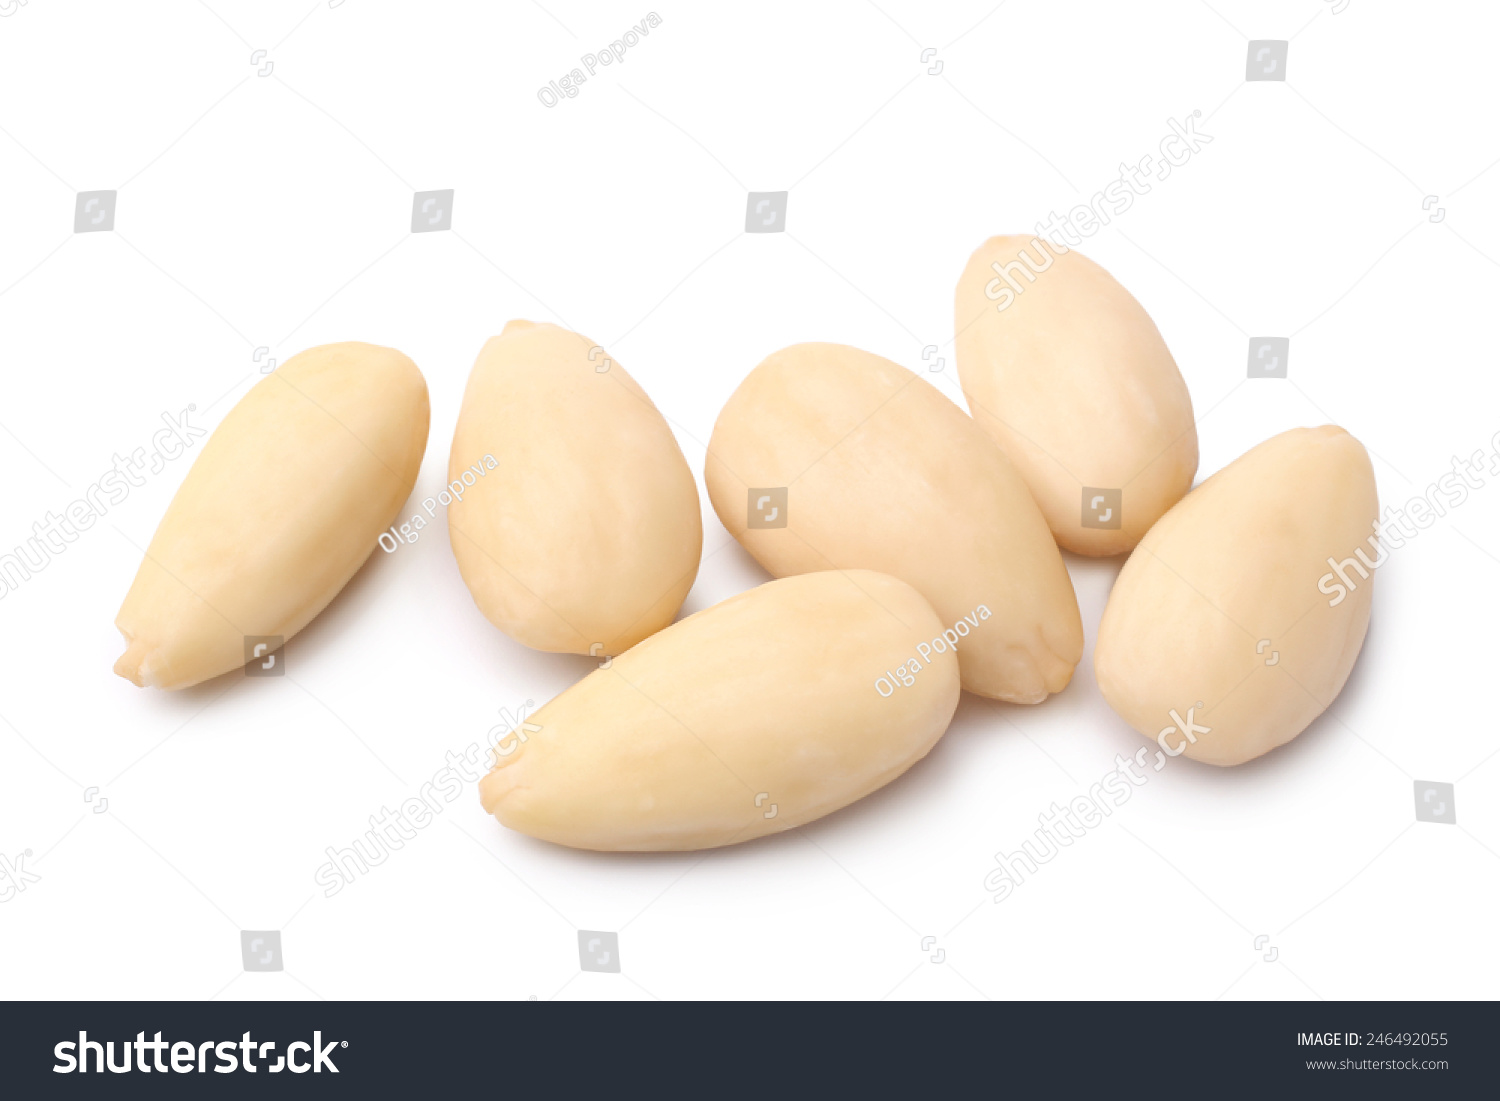 Blanched almonds on white background #246492055